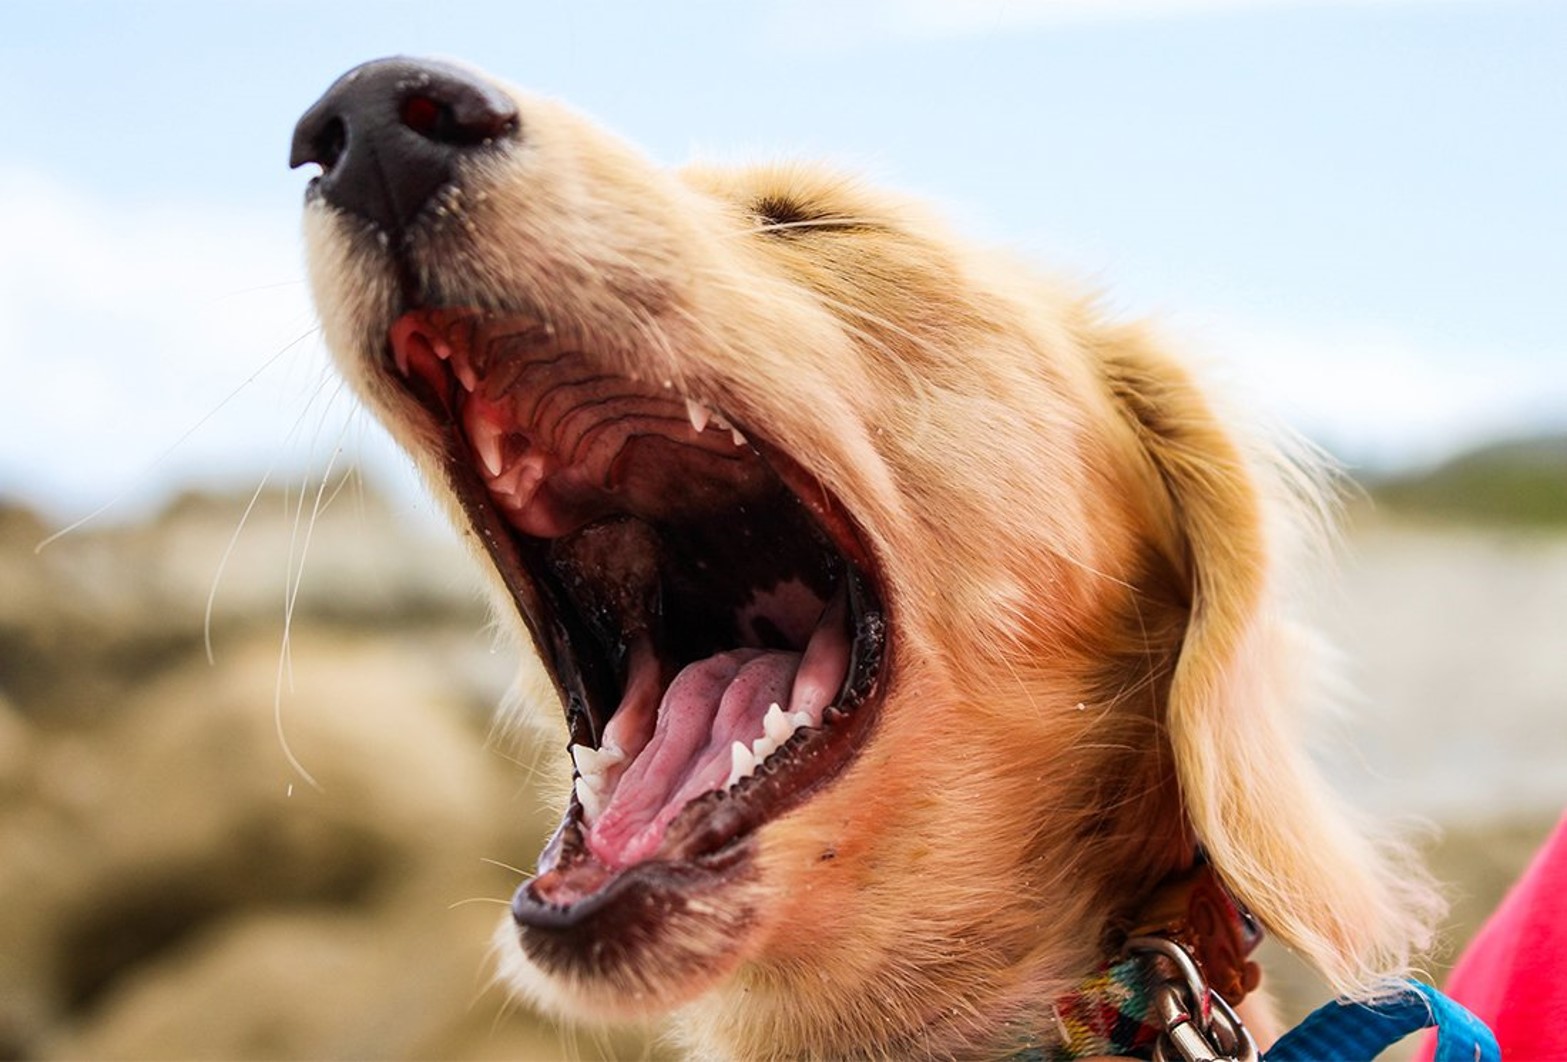 Dog with mouth open.